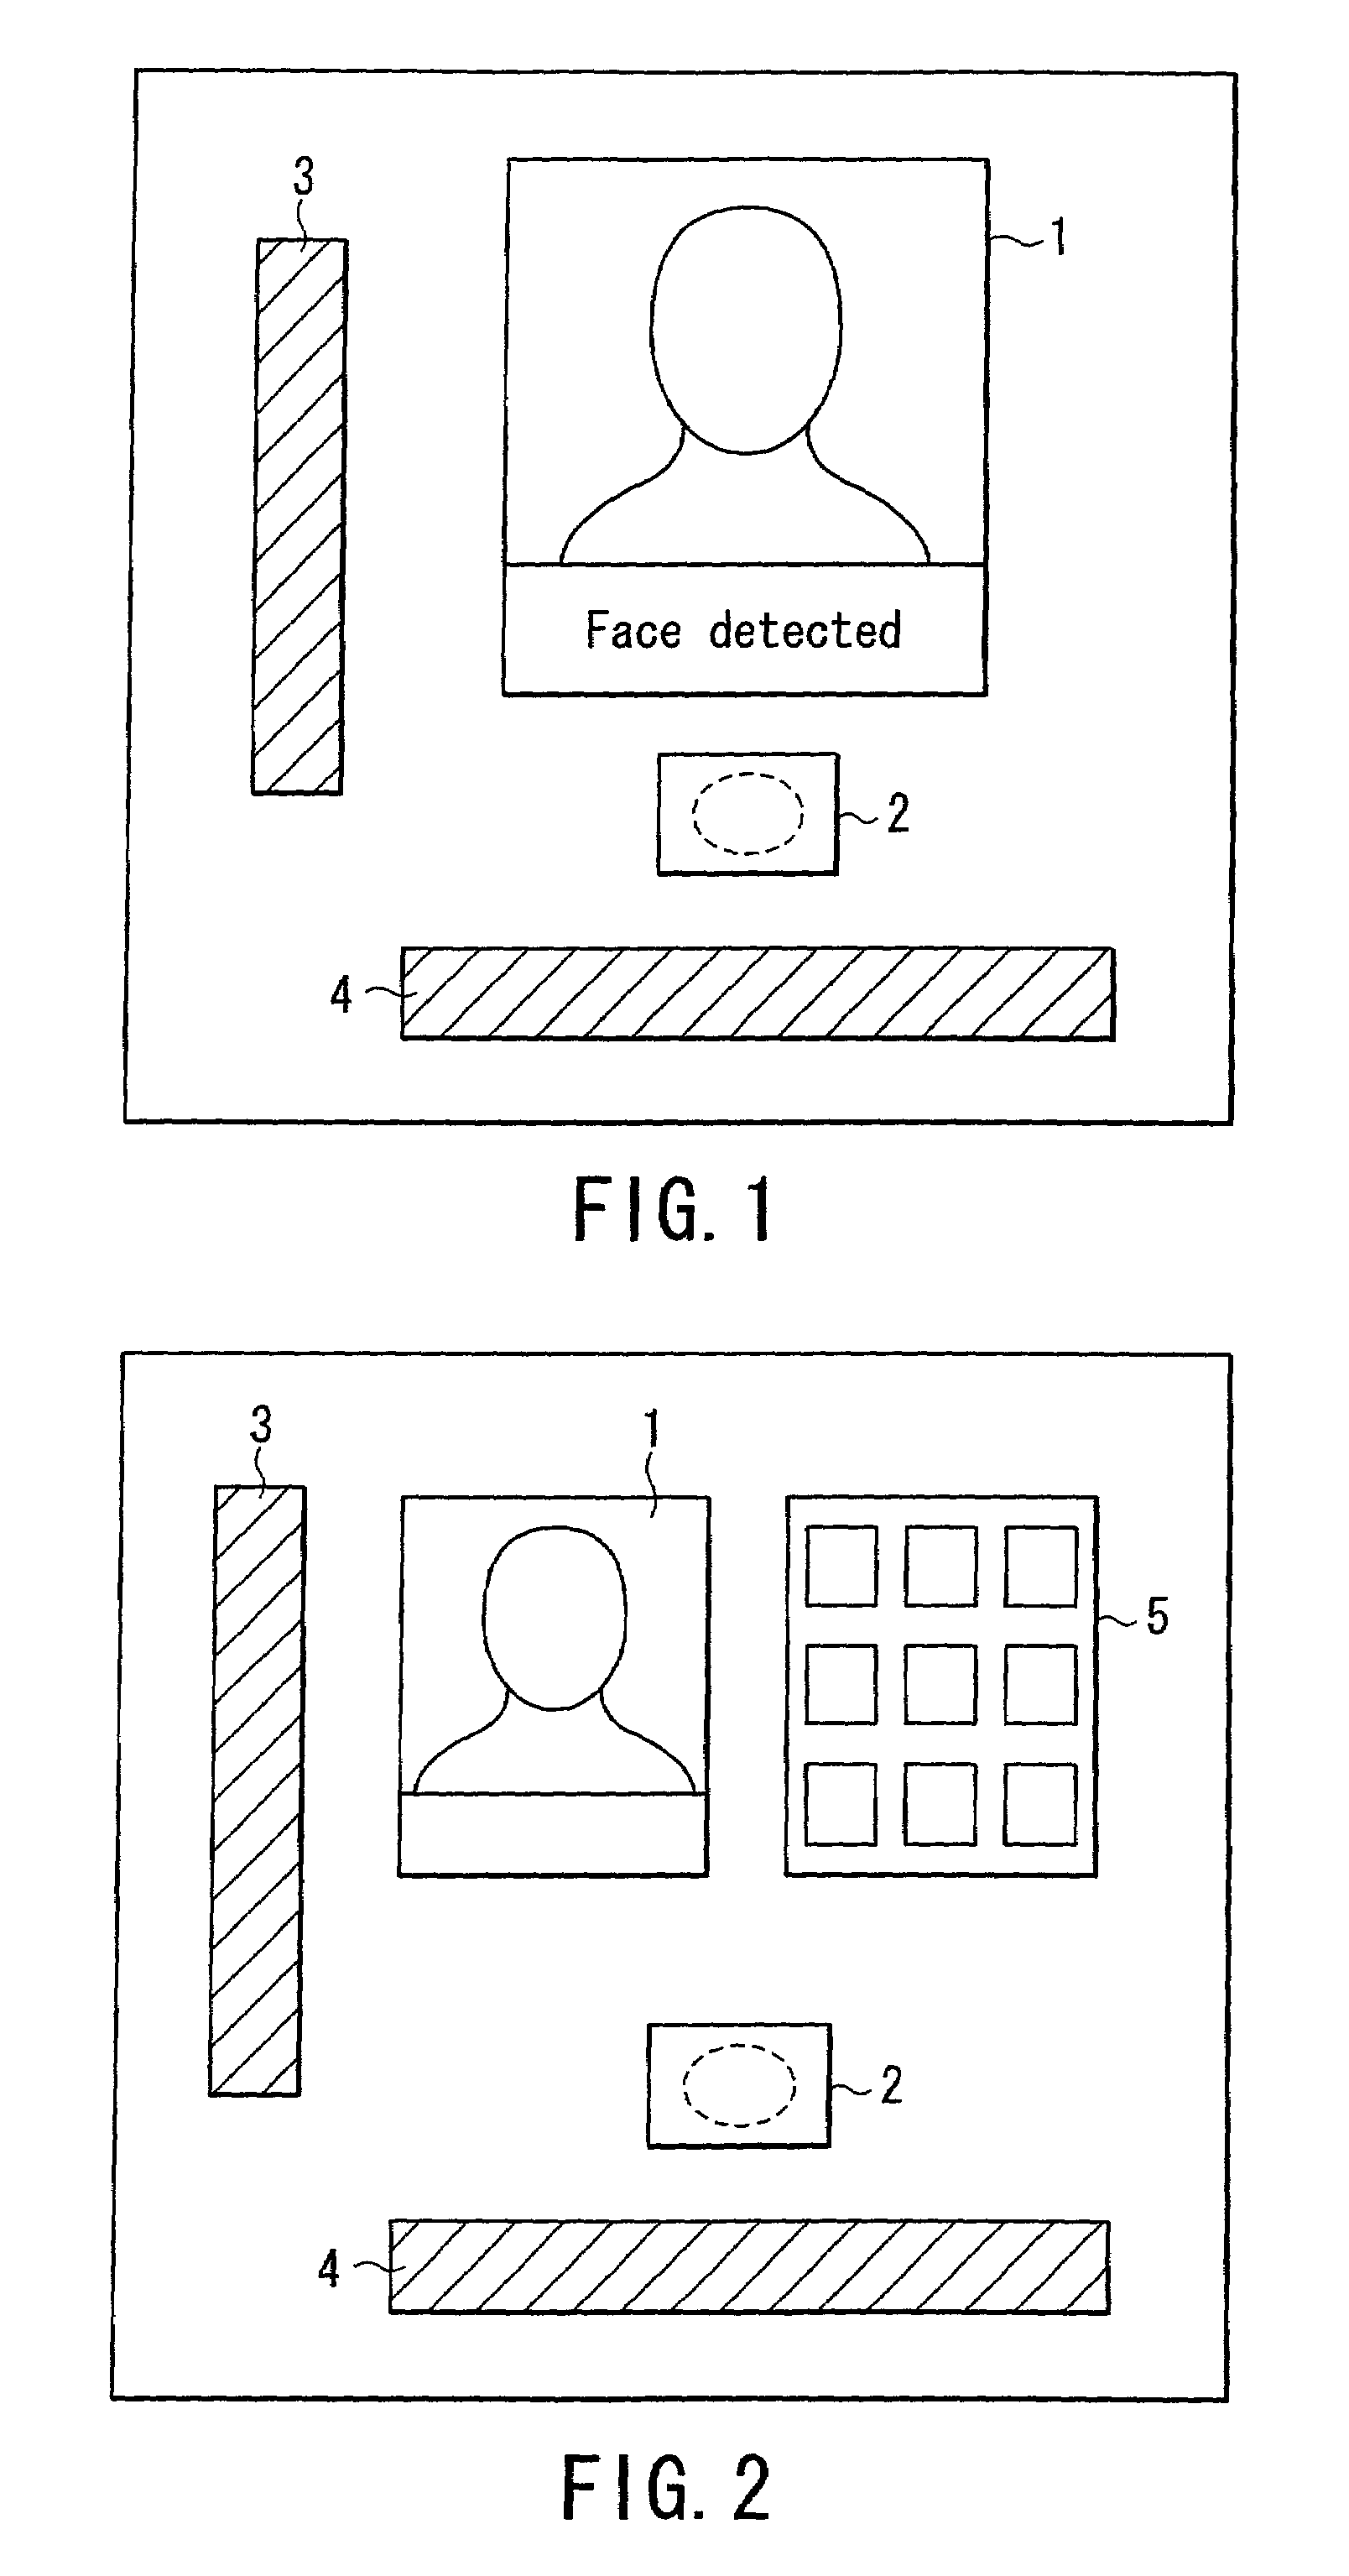 Face image recording system